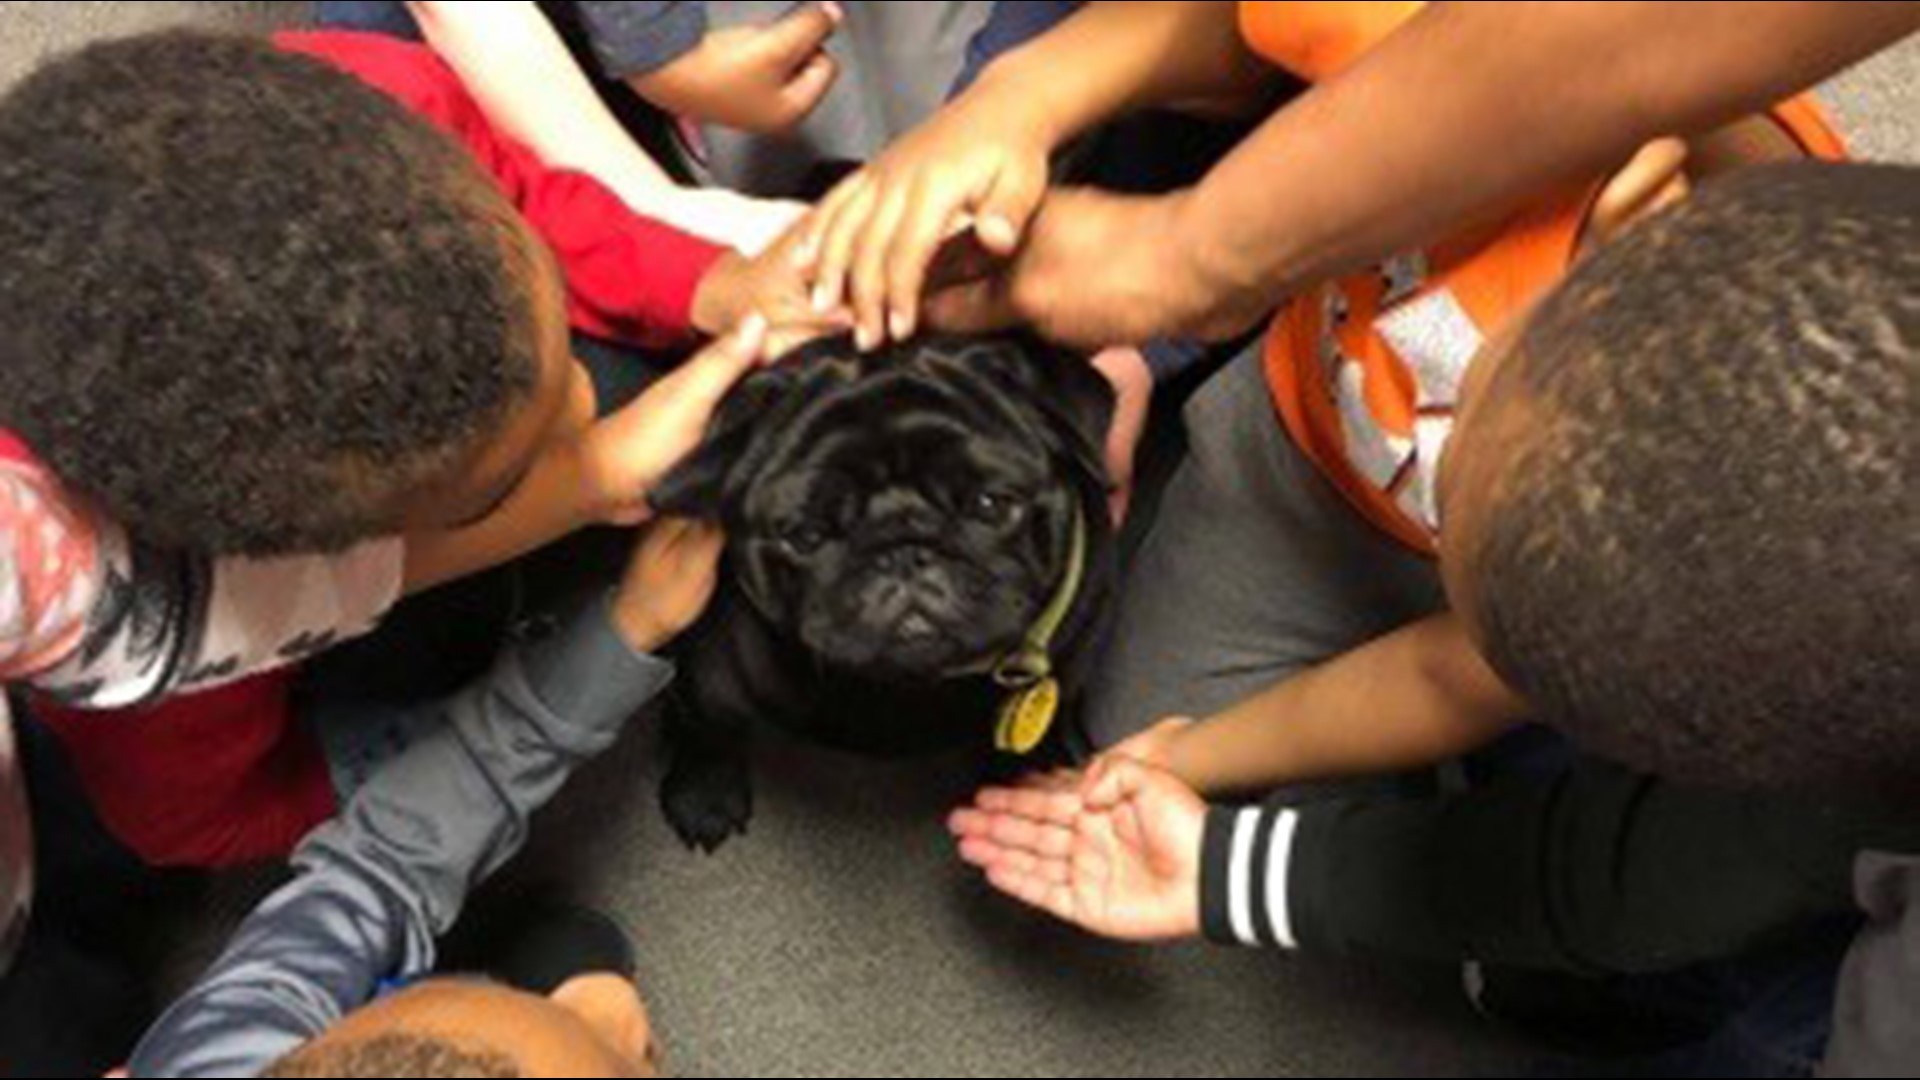 Booker T Pug is a reading therapy dog at South Salem Elementary School in Covington who's headed to New York City to compete in the biggest dog show around - the Westminster Dog Show.